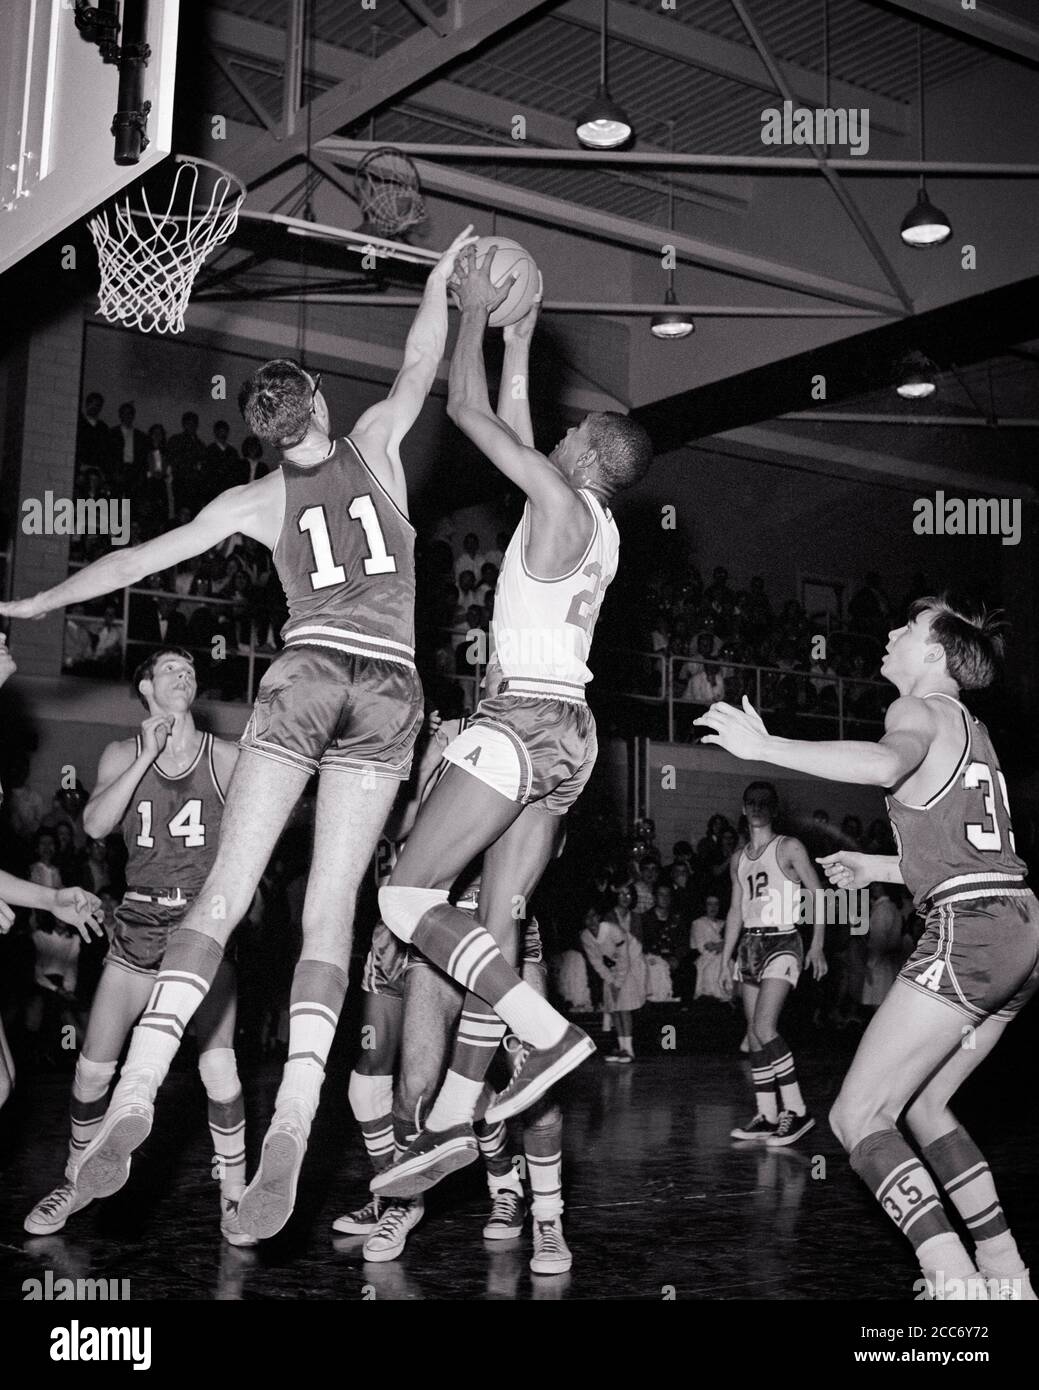 1960s SINGLE ANONYMOUS AFRICAN-AMERICAN YOUNG MAN ATHLETE JUMPING TO SCORE BASKETBALL GOAL SURROUNDED BY CAUCASIAN COMPETITORS - s17545 HAR001 HARS OLD TIME NOSTALGIA OLD FASHION 1 FITNESS JUVENILE STYLE HOOP HEALTHY YOUNG ADULT NET TEAMWORK COMPETITION SCORE ATHLETE GOAL LIFESTYLE ATHLETICS PHYSICAL FITNESS PERSONS INSPIRATION MALES TEENAGE BOY ATHLETIC CONFIDENCE PLAYERS B&W GOALS ACTIVITY PHYSICAL STRENGTH UNIVERSITIES AFRICAN-AMERICANS AFRICAN-AMERICAN AND EXCITEMENT HOOPS PROGRESS RECREATION SURROUNDED BLACK ETHNICITY PRIDE BY TO HIGHER EDUCATION ATHLETES FLEXIBILITY MUSCLES SCORING Stock Photo